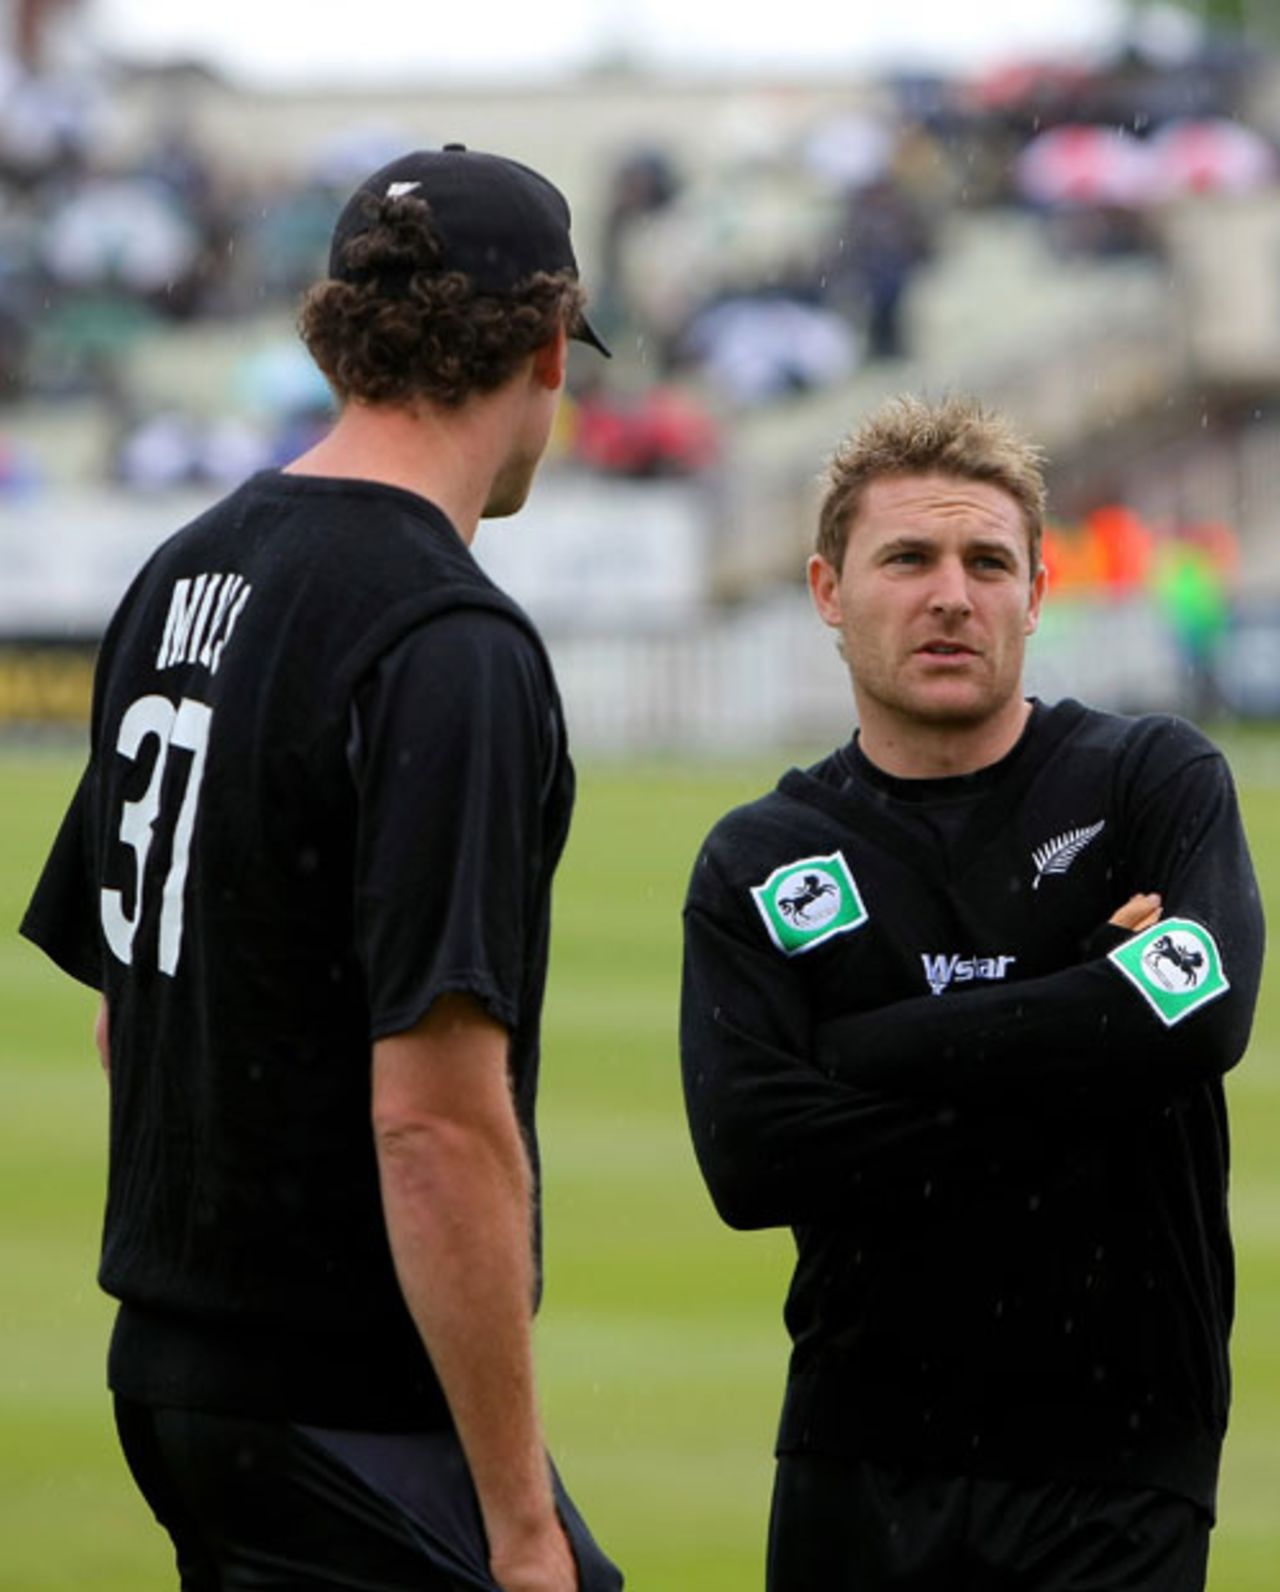 Kyle Mills and Brendon McCullum wait in the rain as the start of play is delayed, England v New Zealand, 2nd ODI, Edgbaston, June 18, 2008